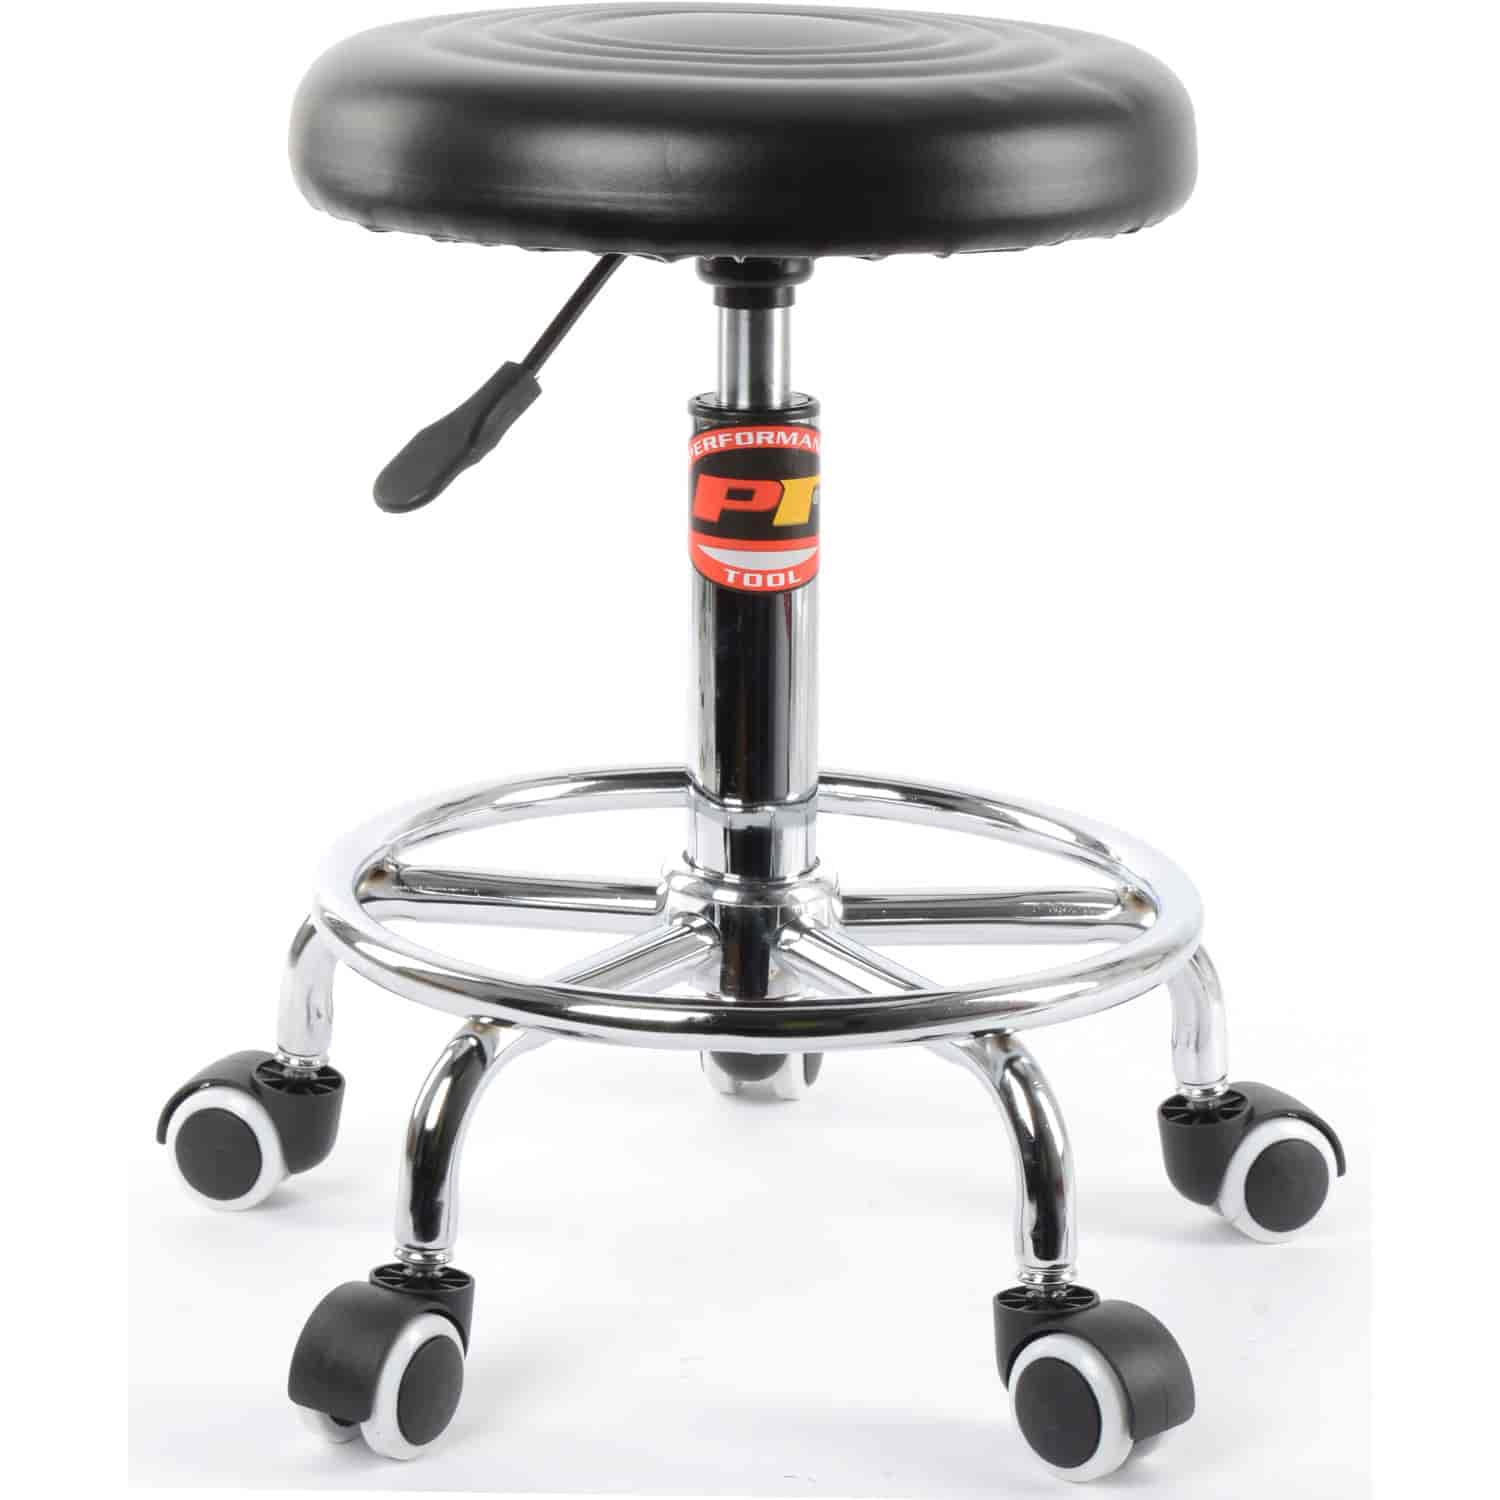 Pneumatic Rolling Stool 250 lb. Capacity Adjustable from 19 in. to 24 in.